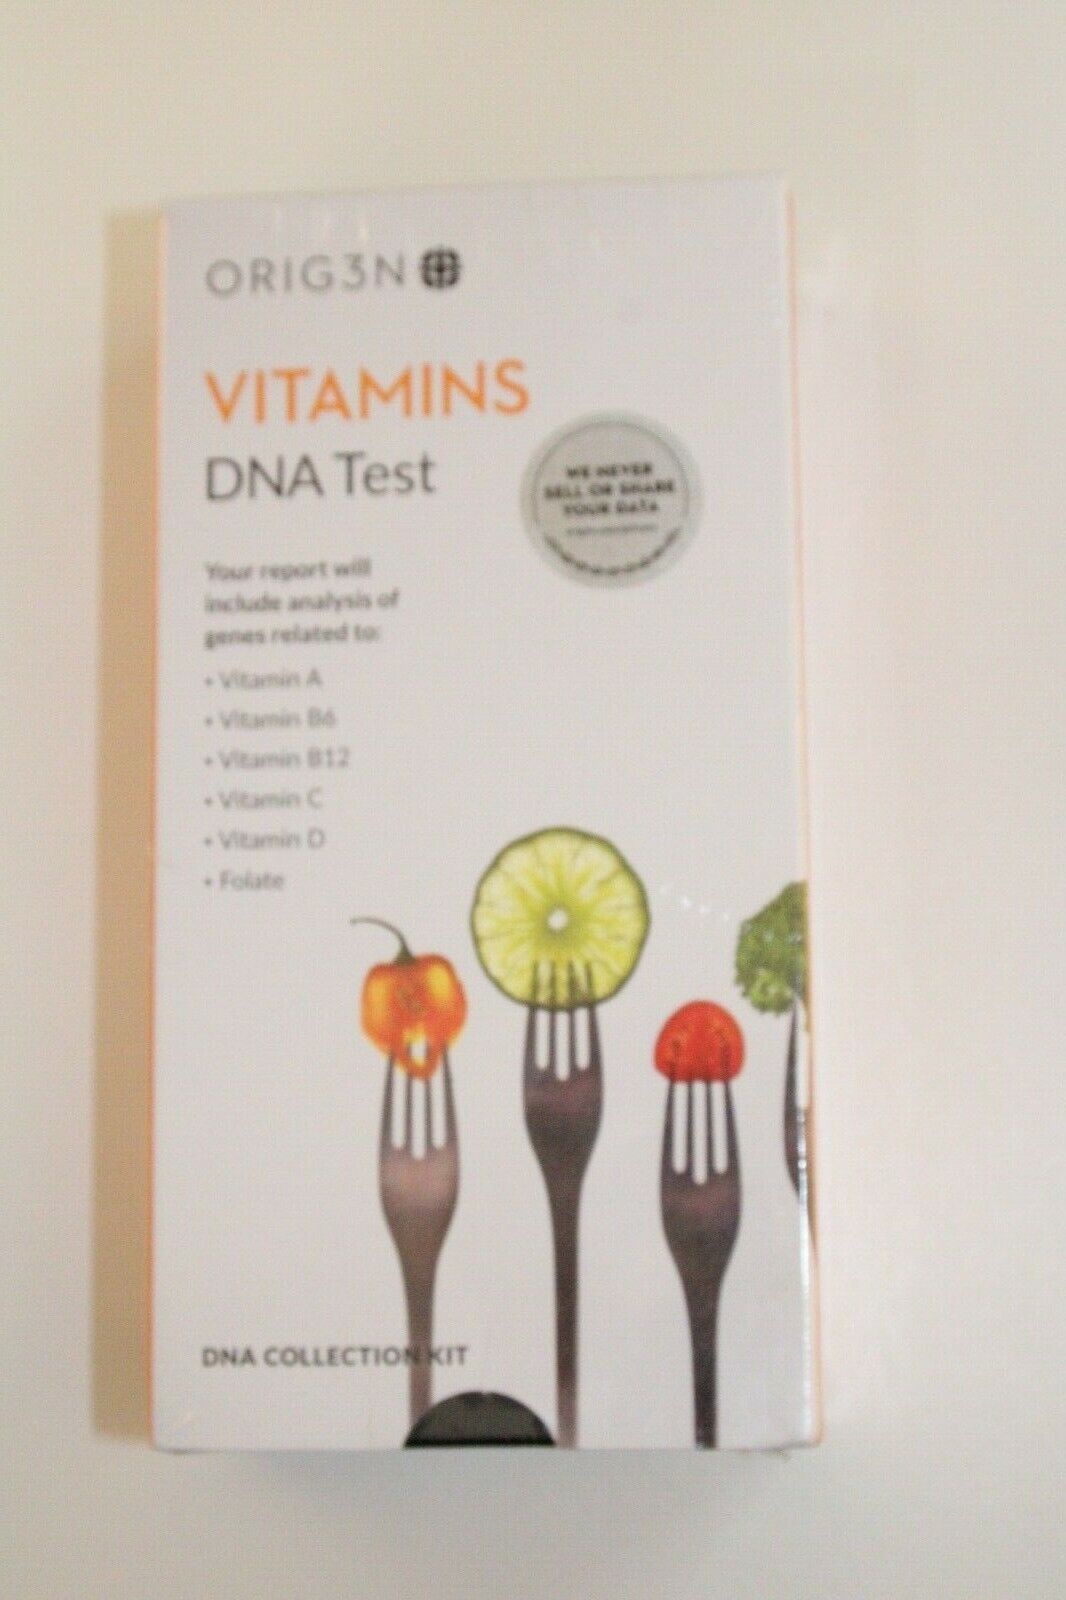 Orig3n Vitamins Dna Test Collection Kit : Do You Have Any Vitamin Deficiencies?